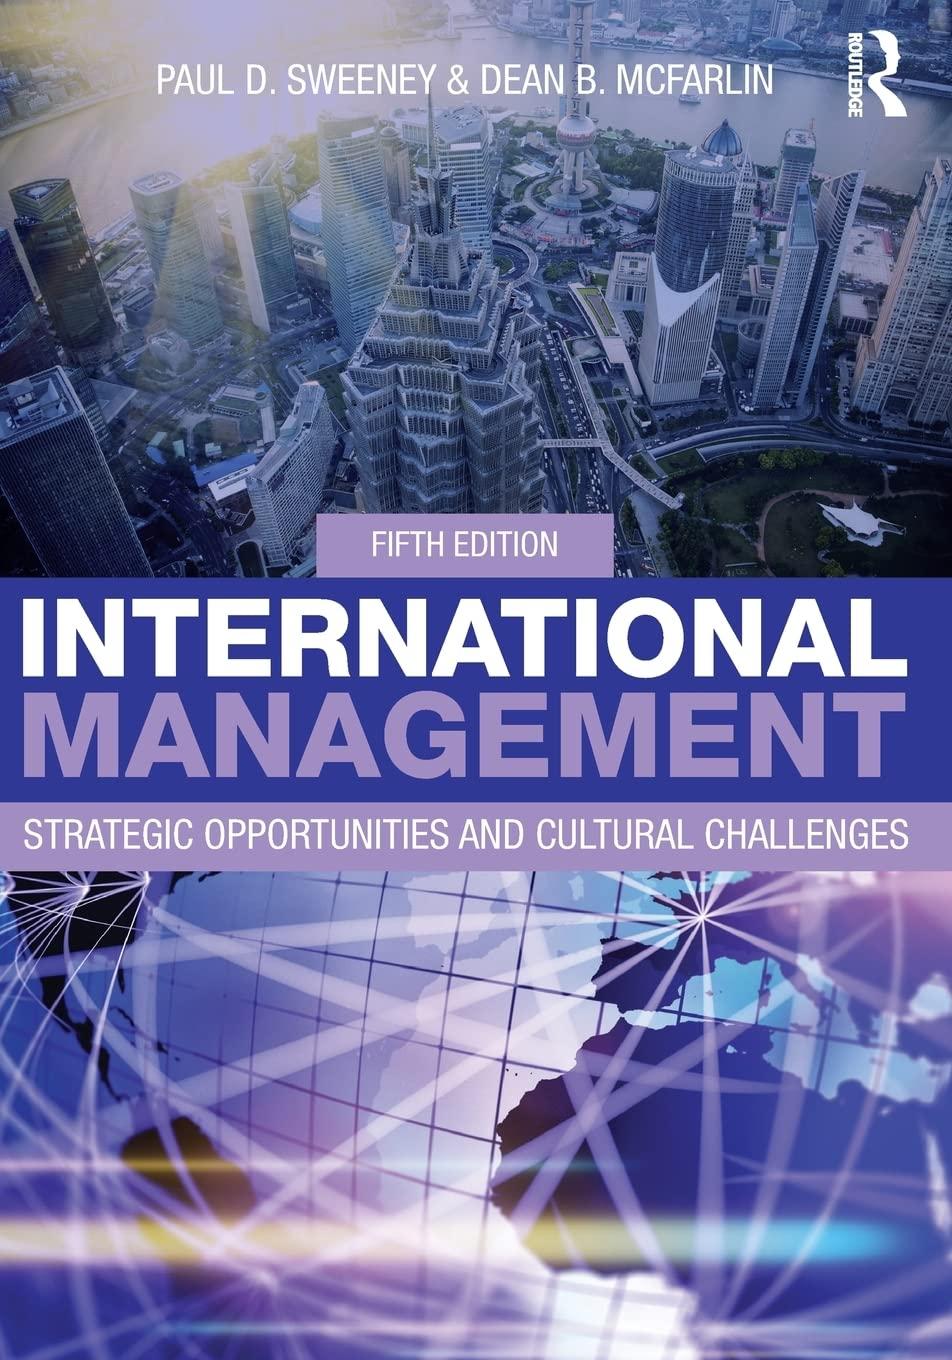 international management strategic opportunities and cultural challenges 5th edition paul sweeney, dean